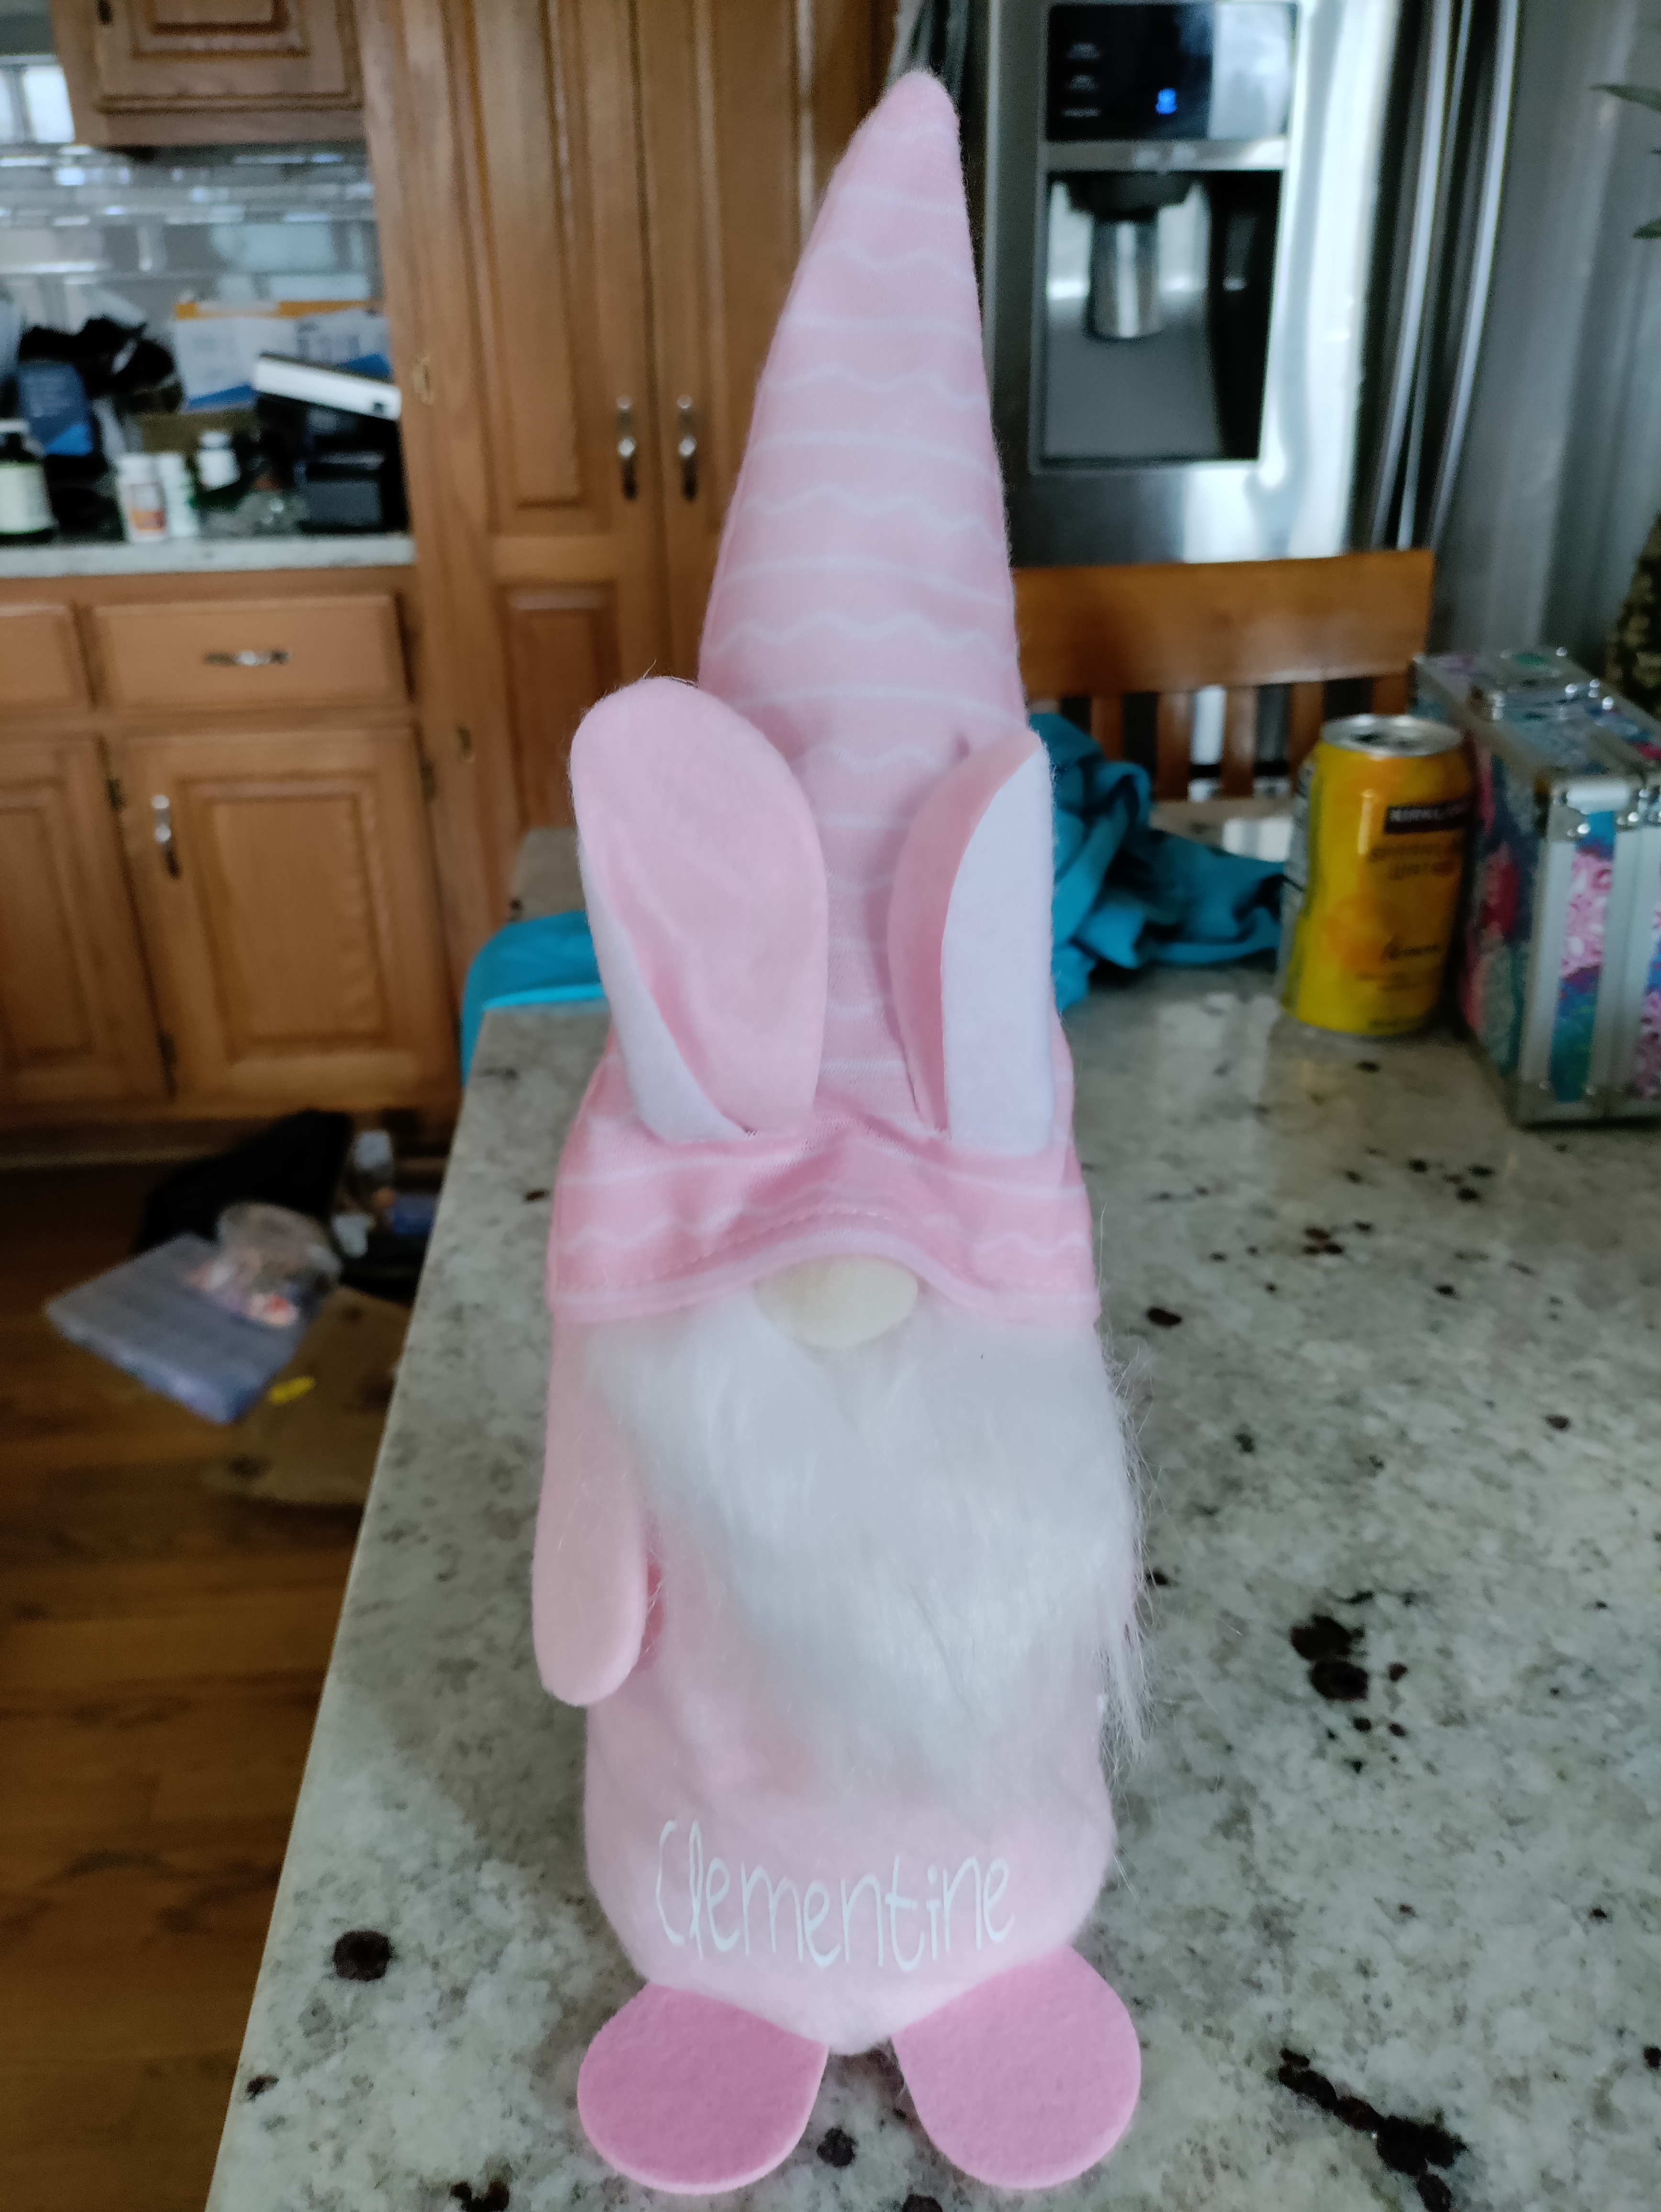 Clementine Gnome – Part of the Wandering Gnome Family – Eggapalooza 2022